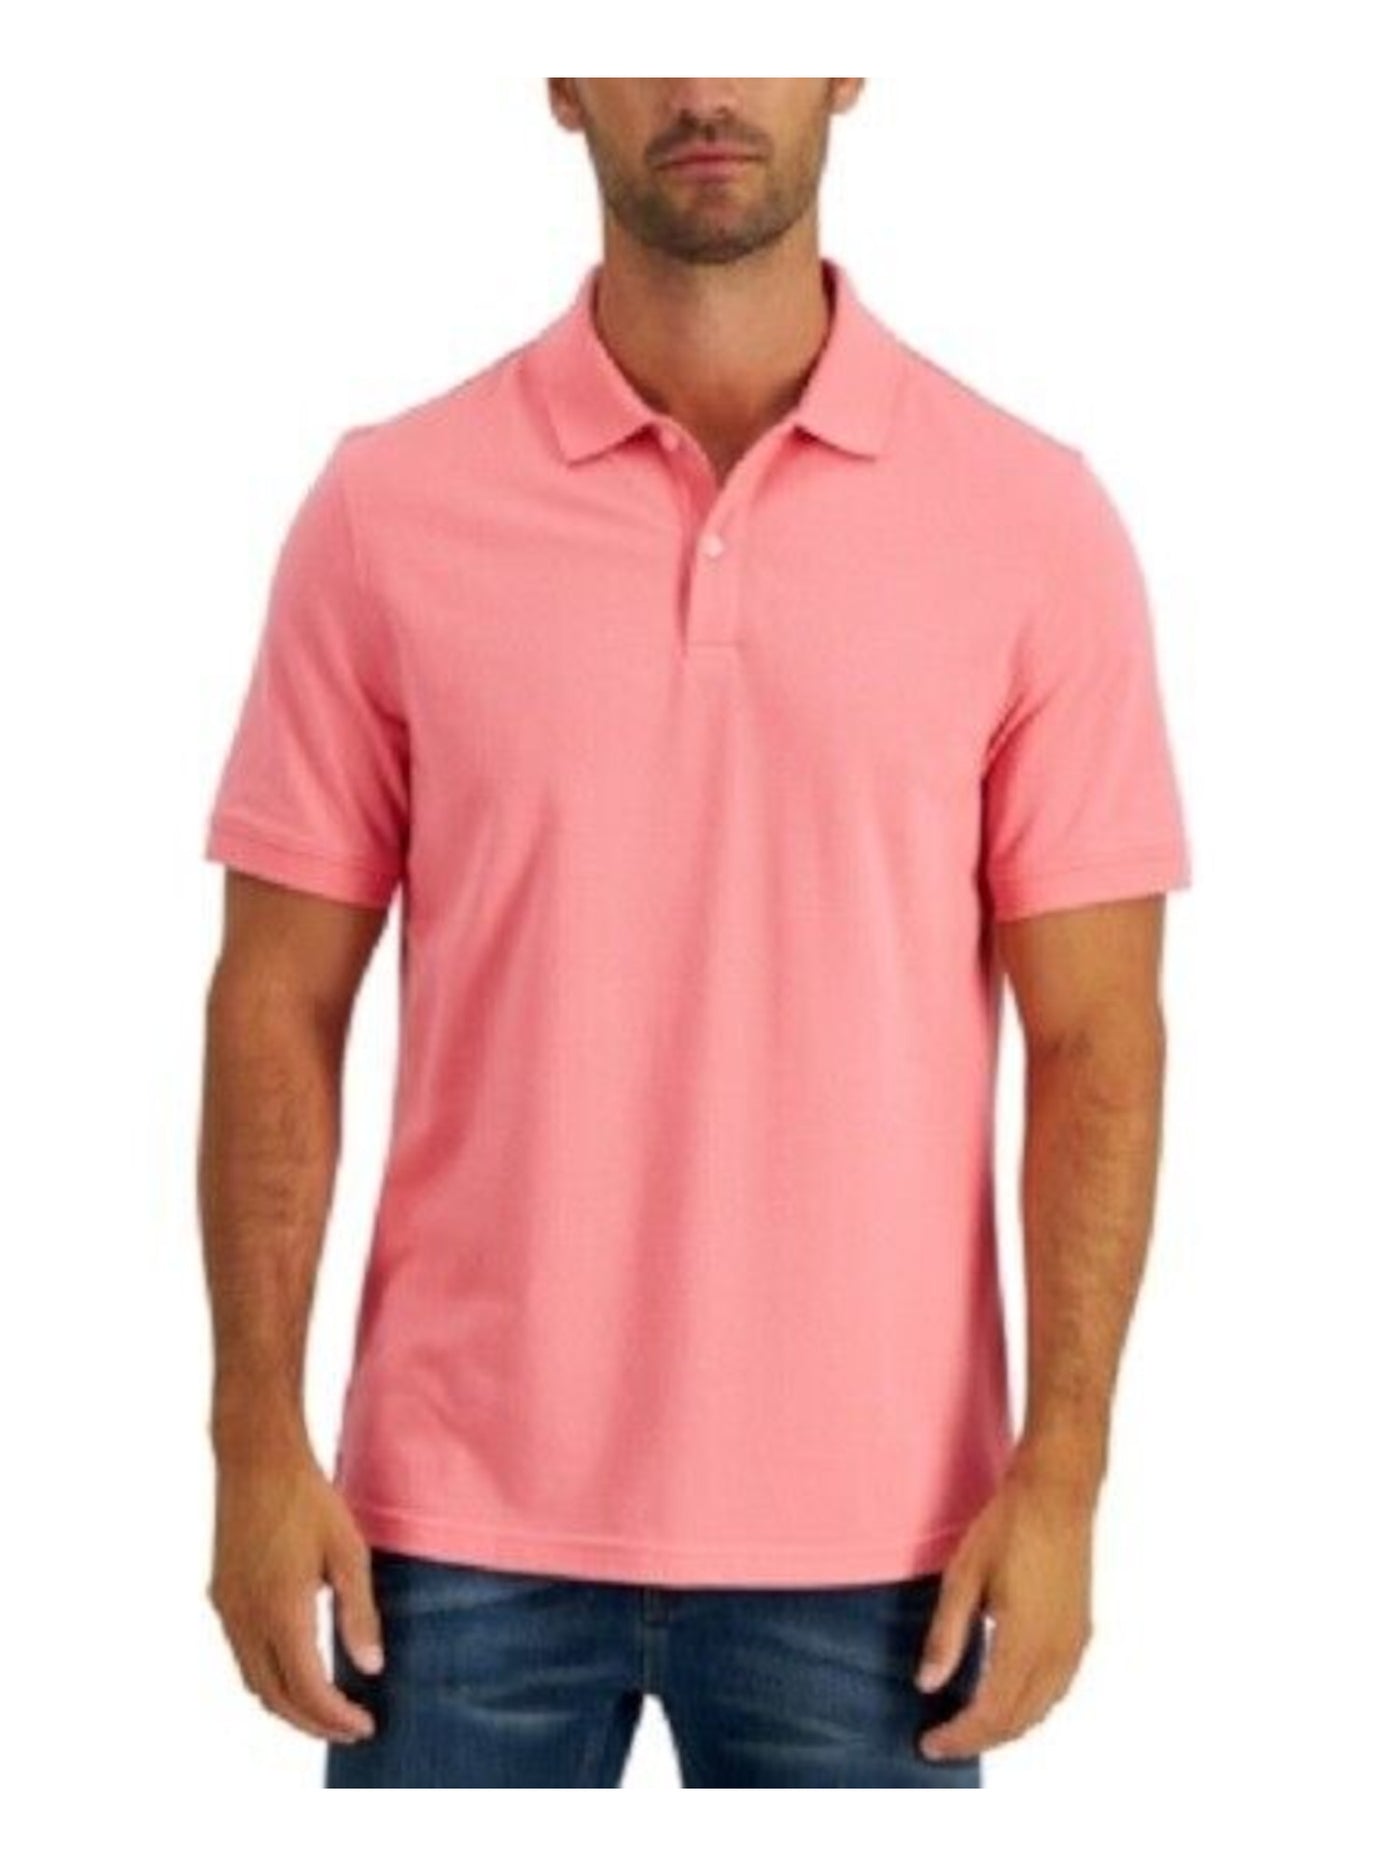 CLUBROOM Mens Coral Classic Fit Moisture Wicking Polo M